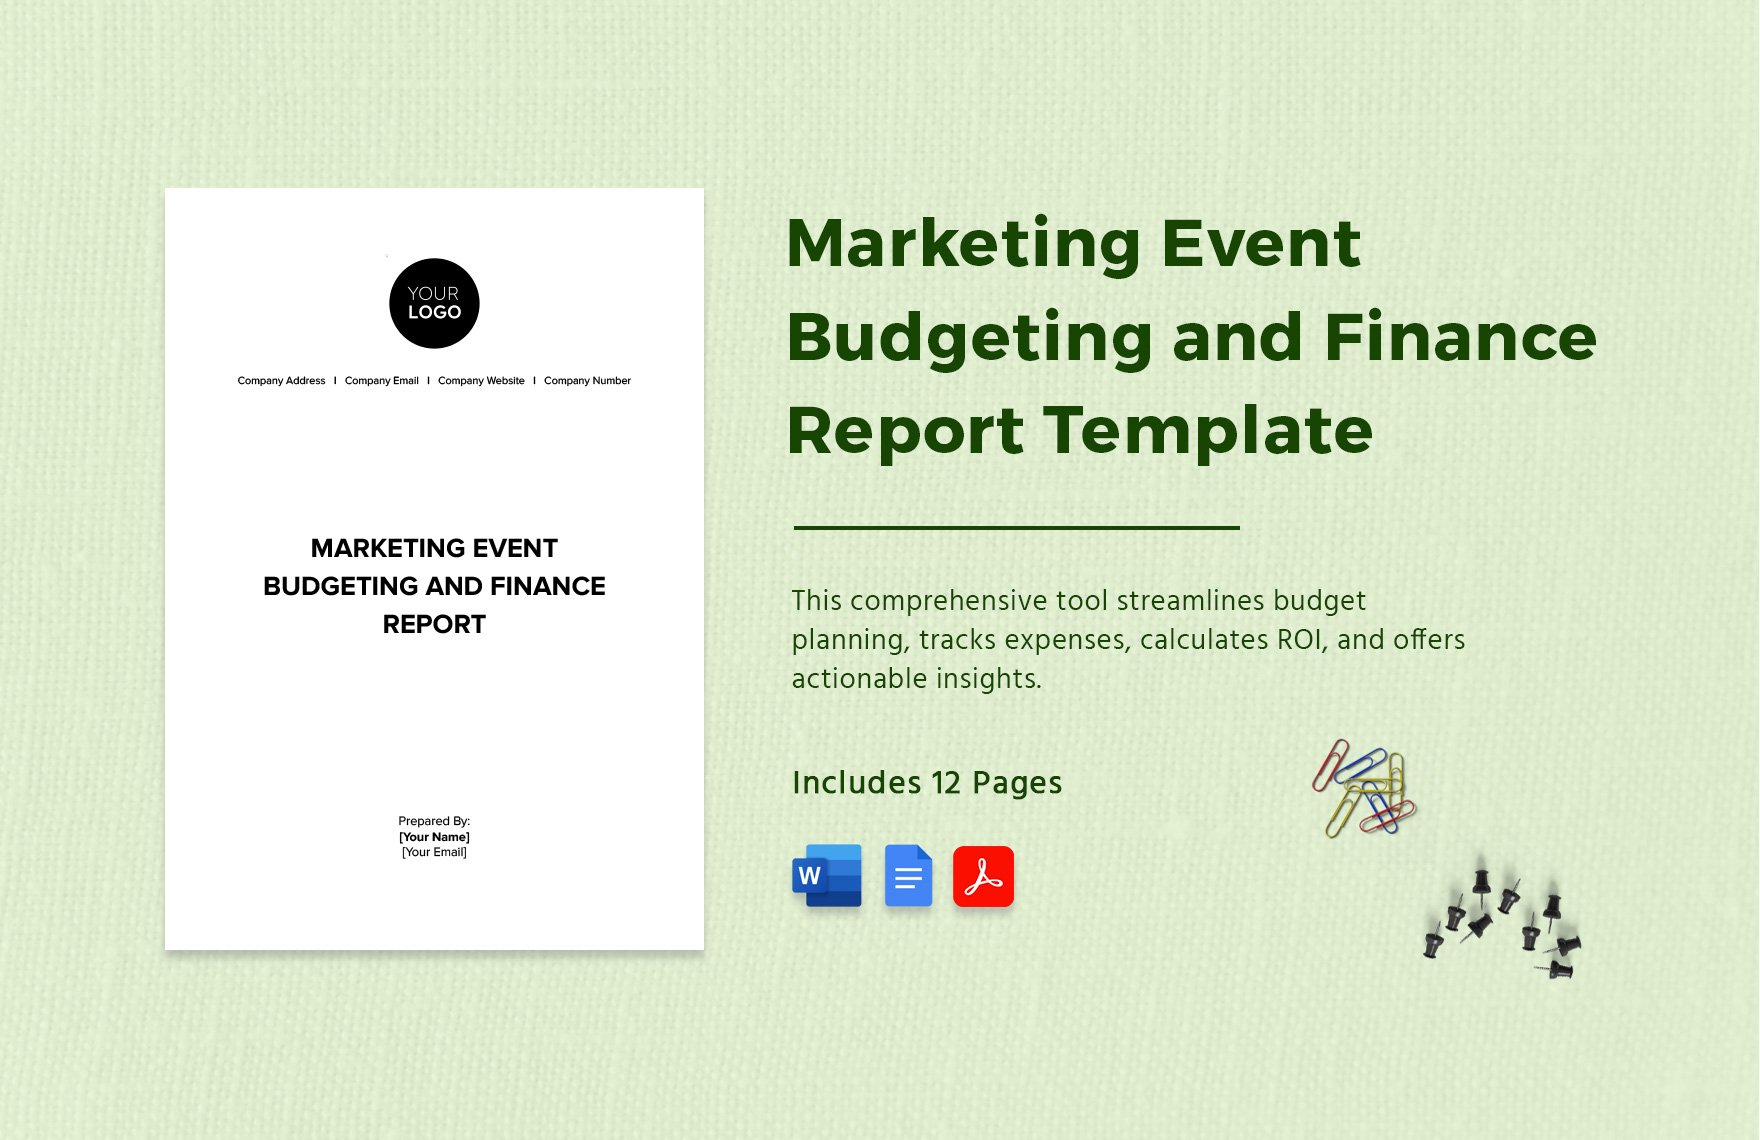 Marketing Event Budgeting and Finance Report Template